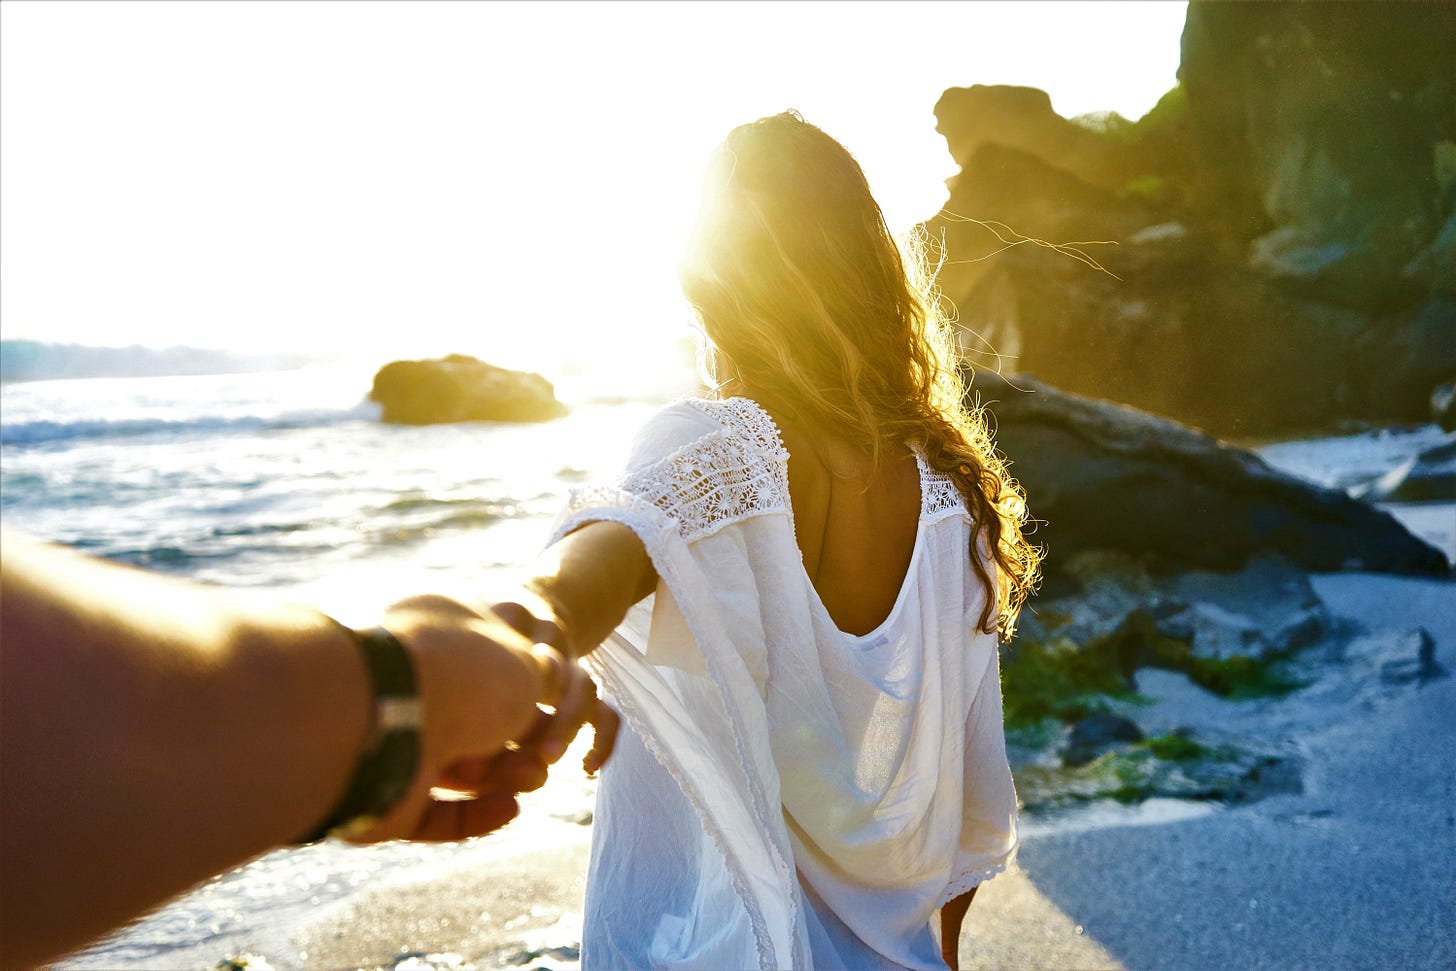 back view of woman wearing white shirt walking on beach and holding a man's hand